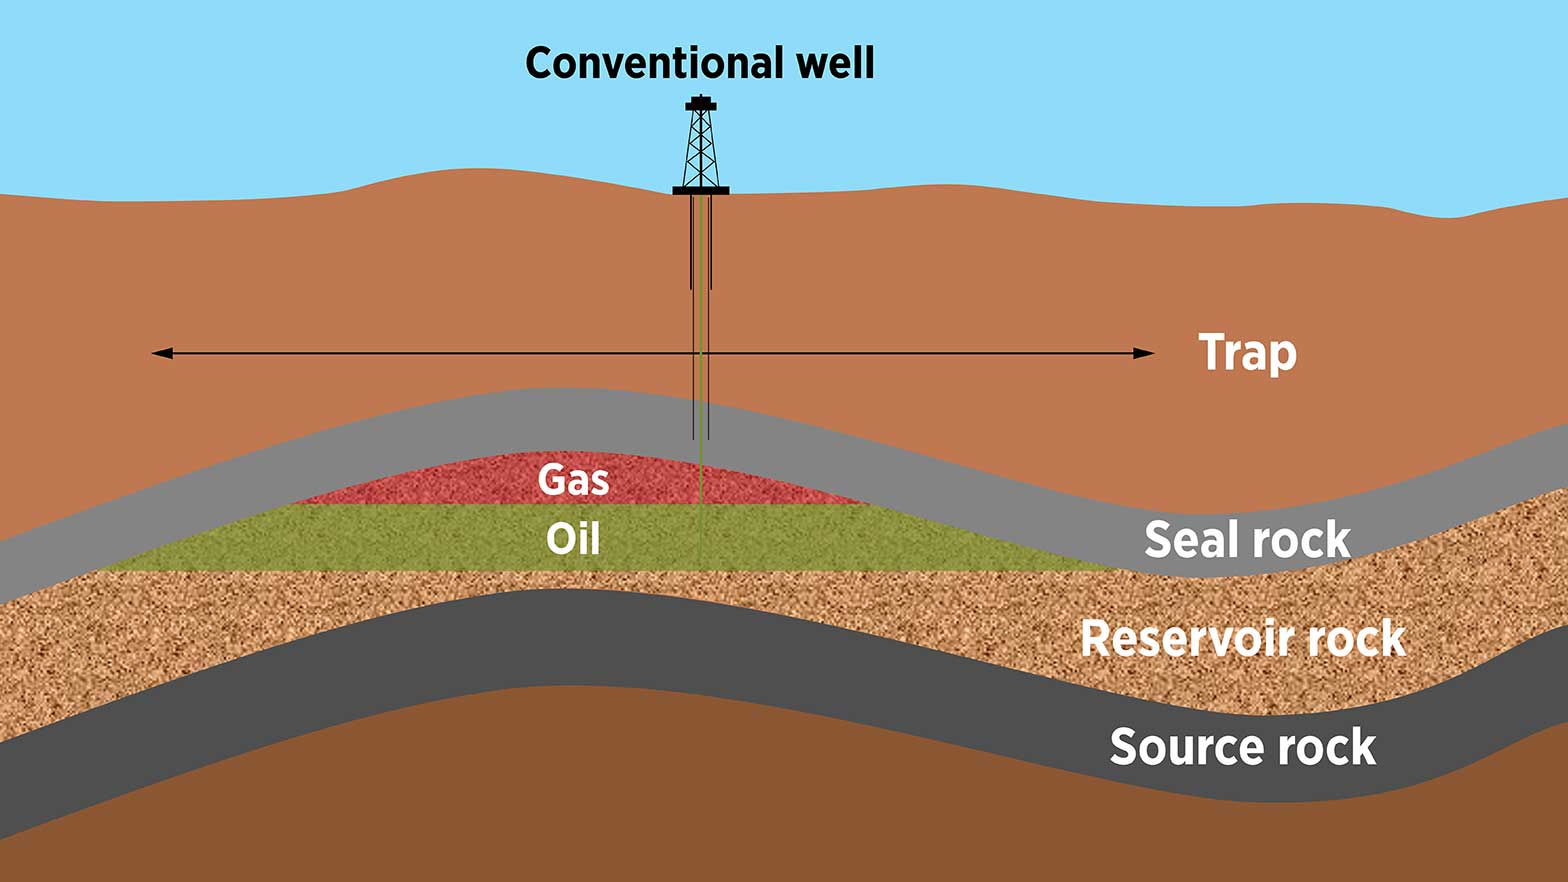 image of the the ground below the conventional wells, showing trap, seal rock, gas, oil, reservoir rock and source rock